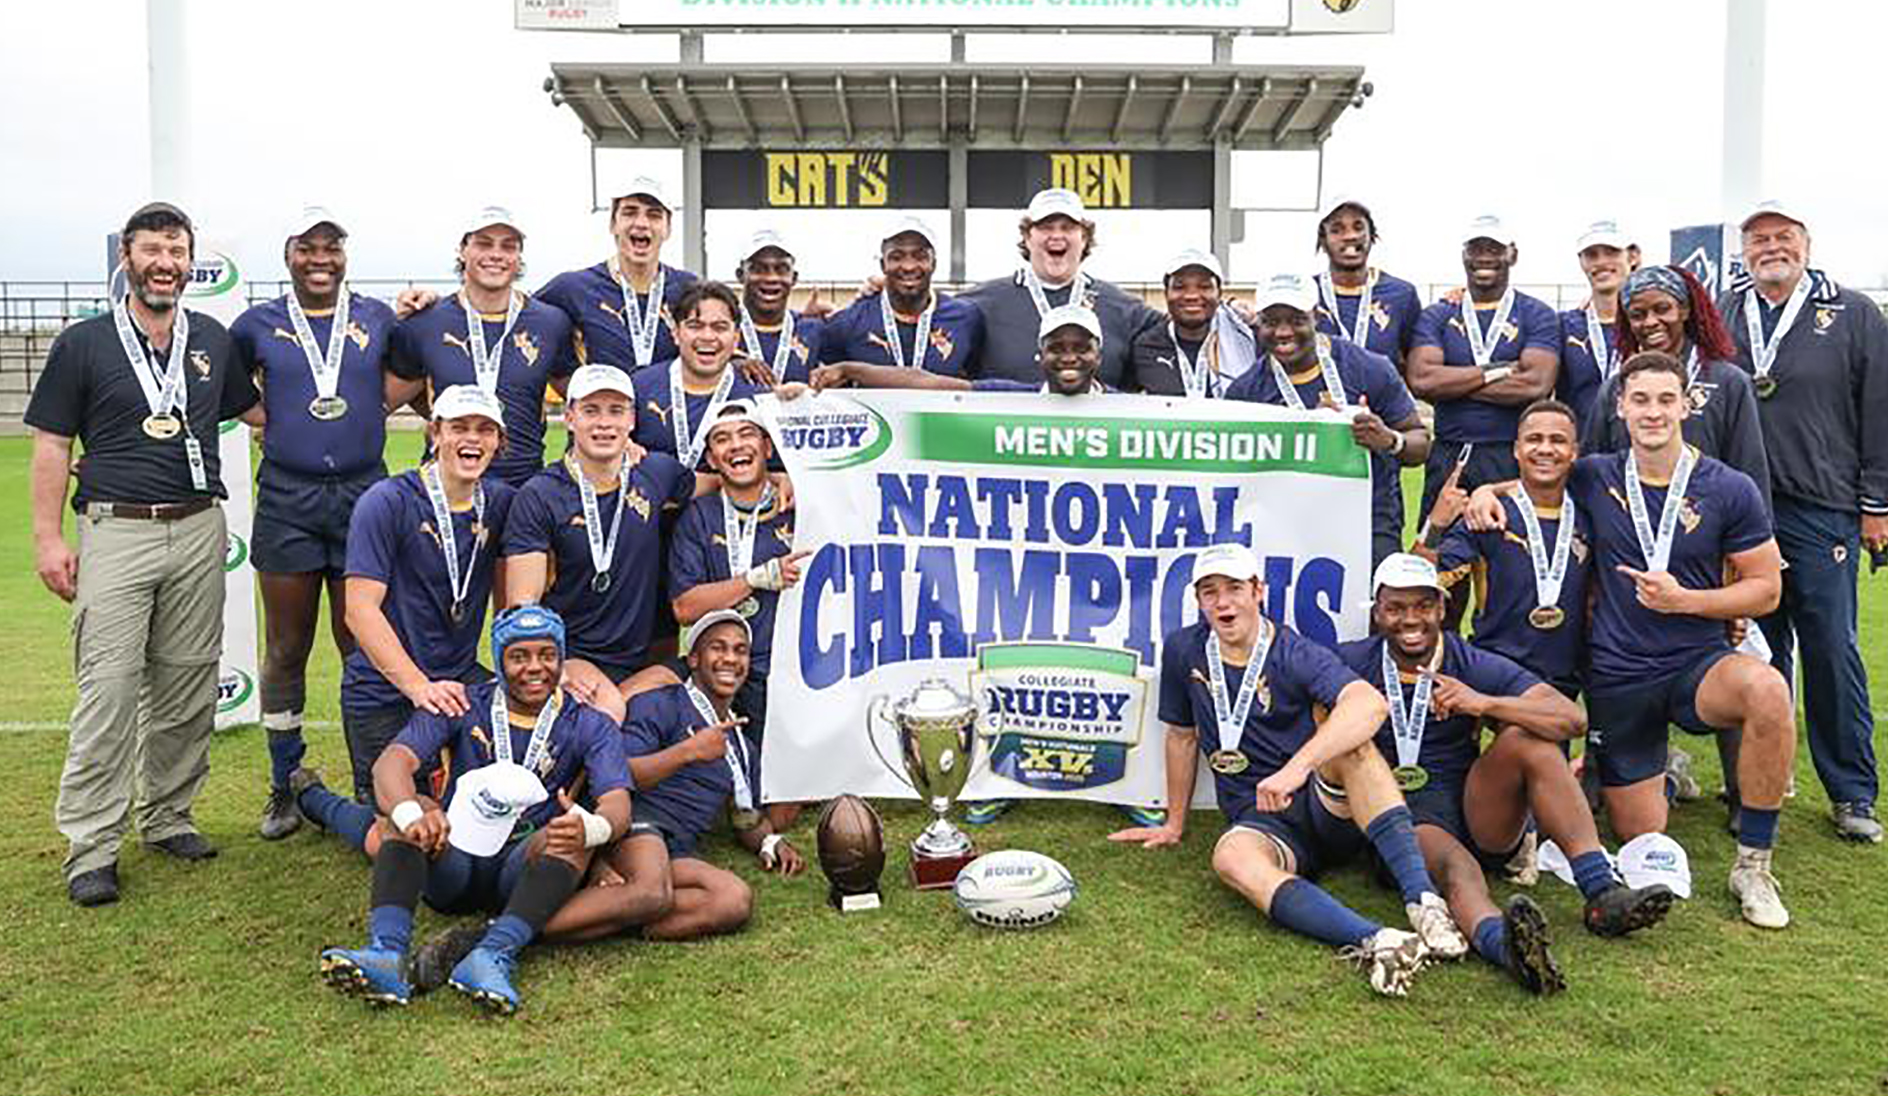 2022 Collegiate Rugby Championship Becomes the Largest Ever Collegiate Rugby  Tournament - Collegiate Rugby Championship